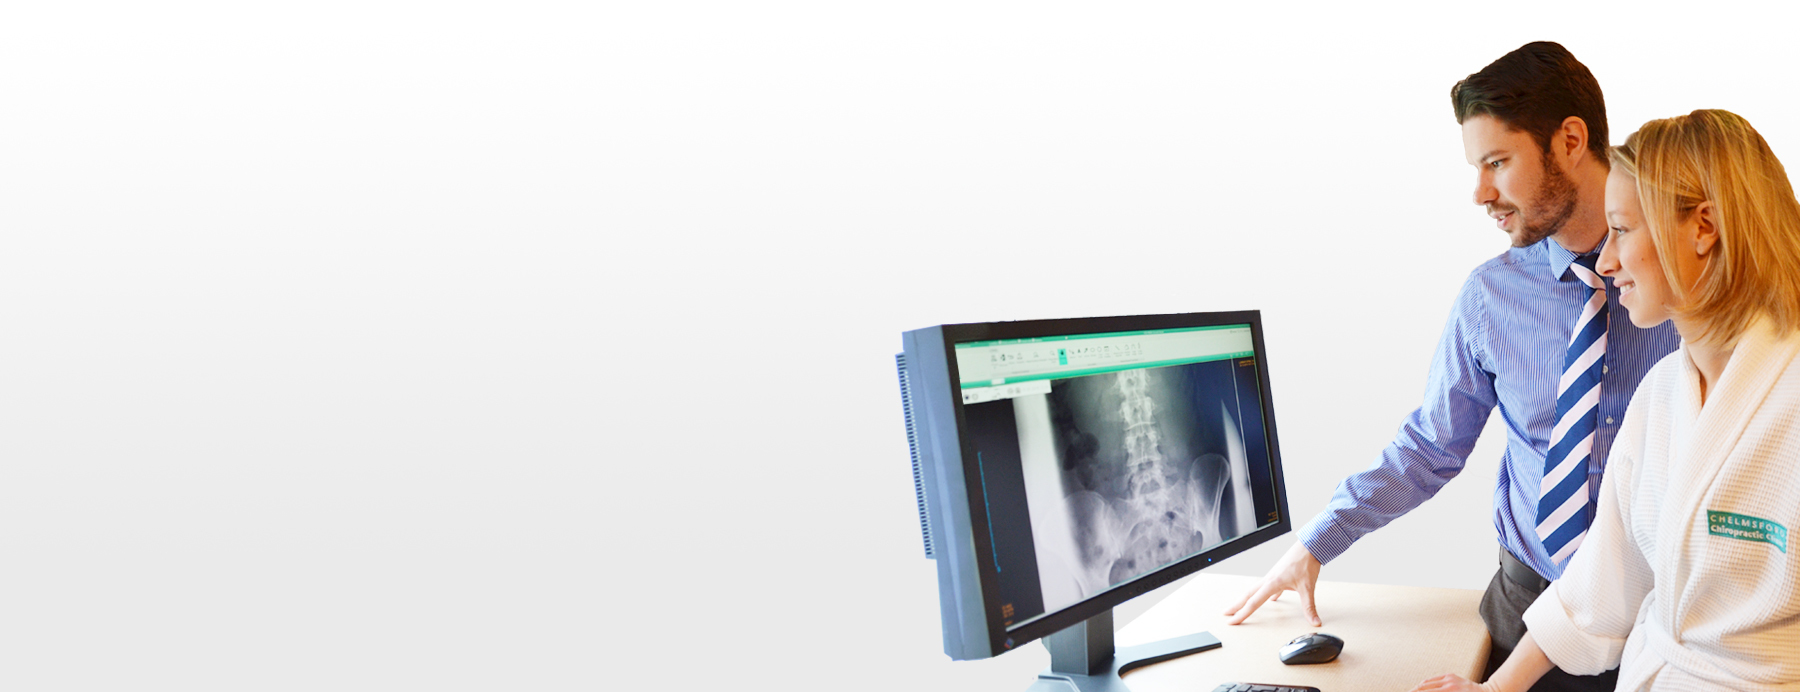 Onsite Digital X-rays for accurate, visual care